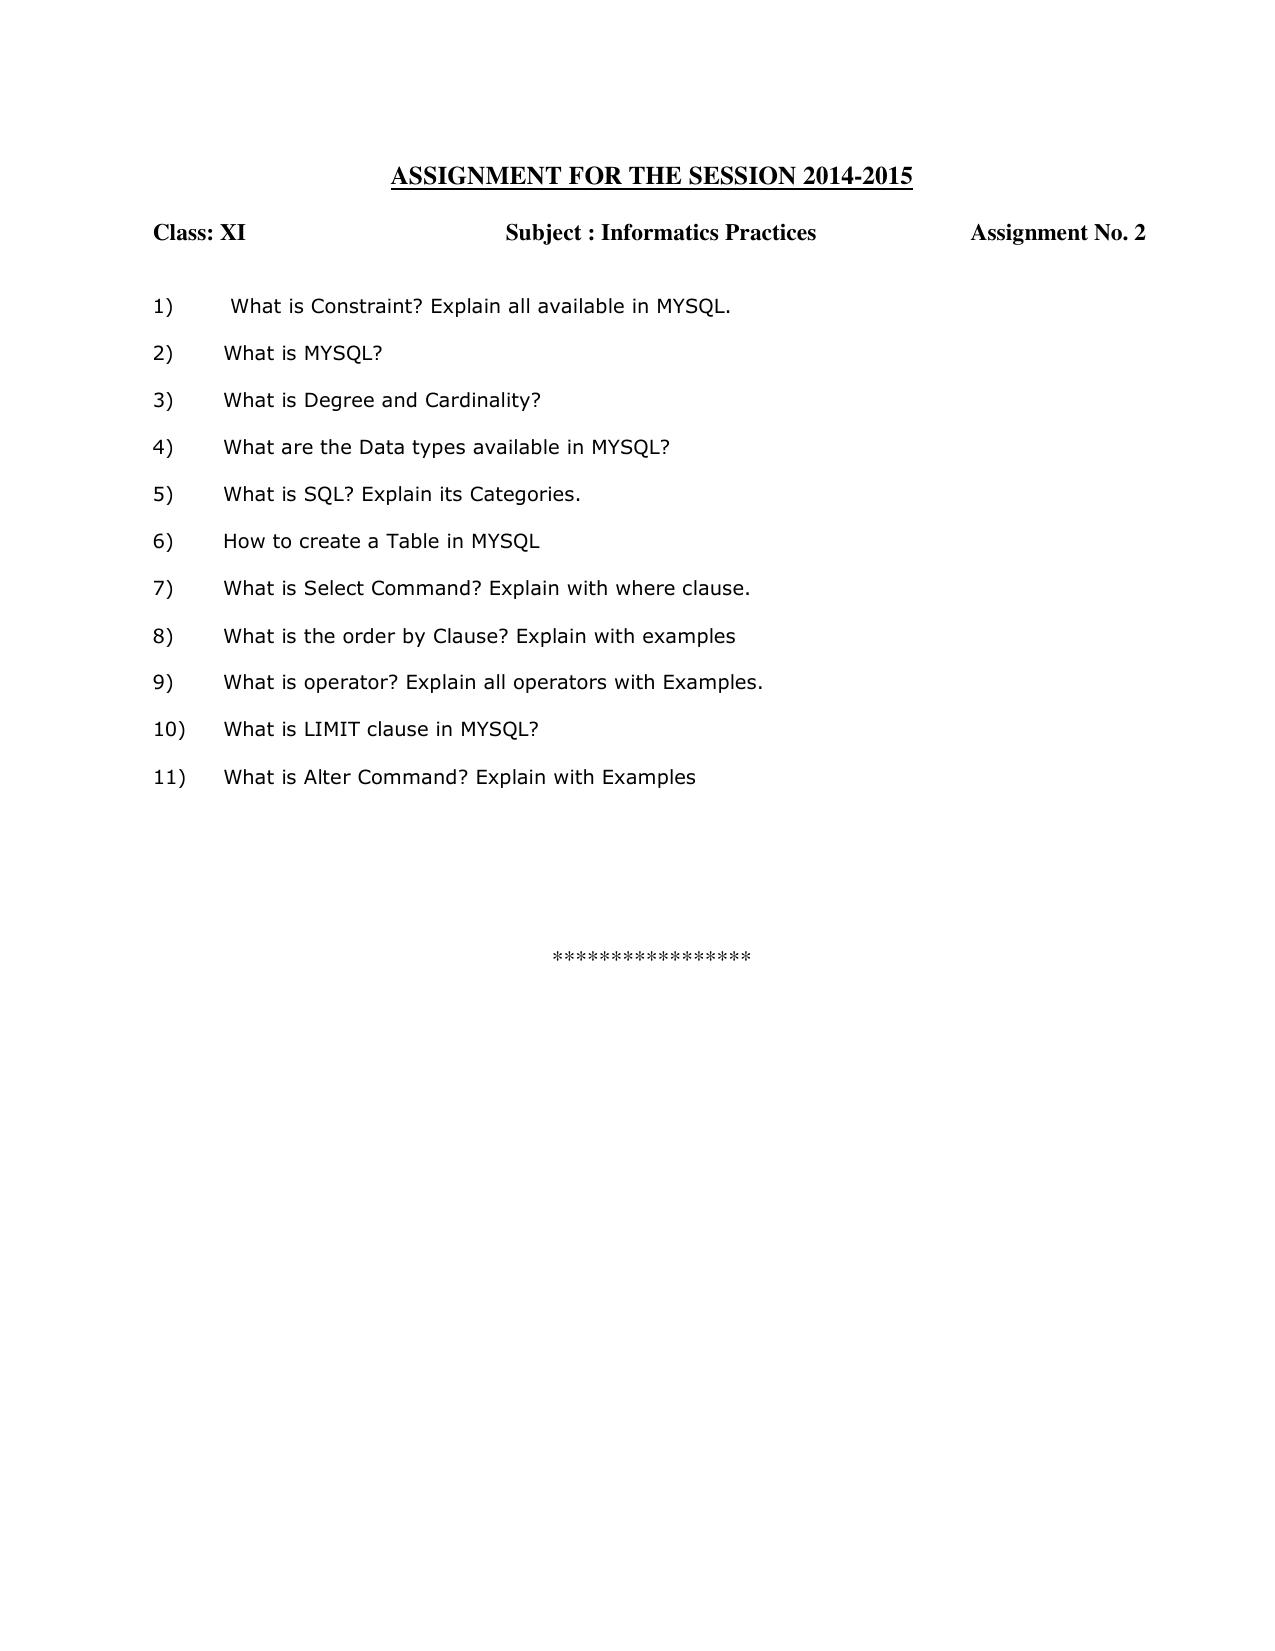 CBSE Worksheets for Class 11 Information Practices Assignment 4 - Page 1